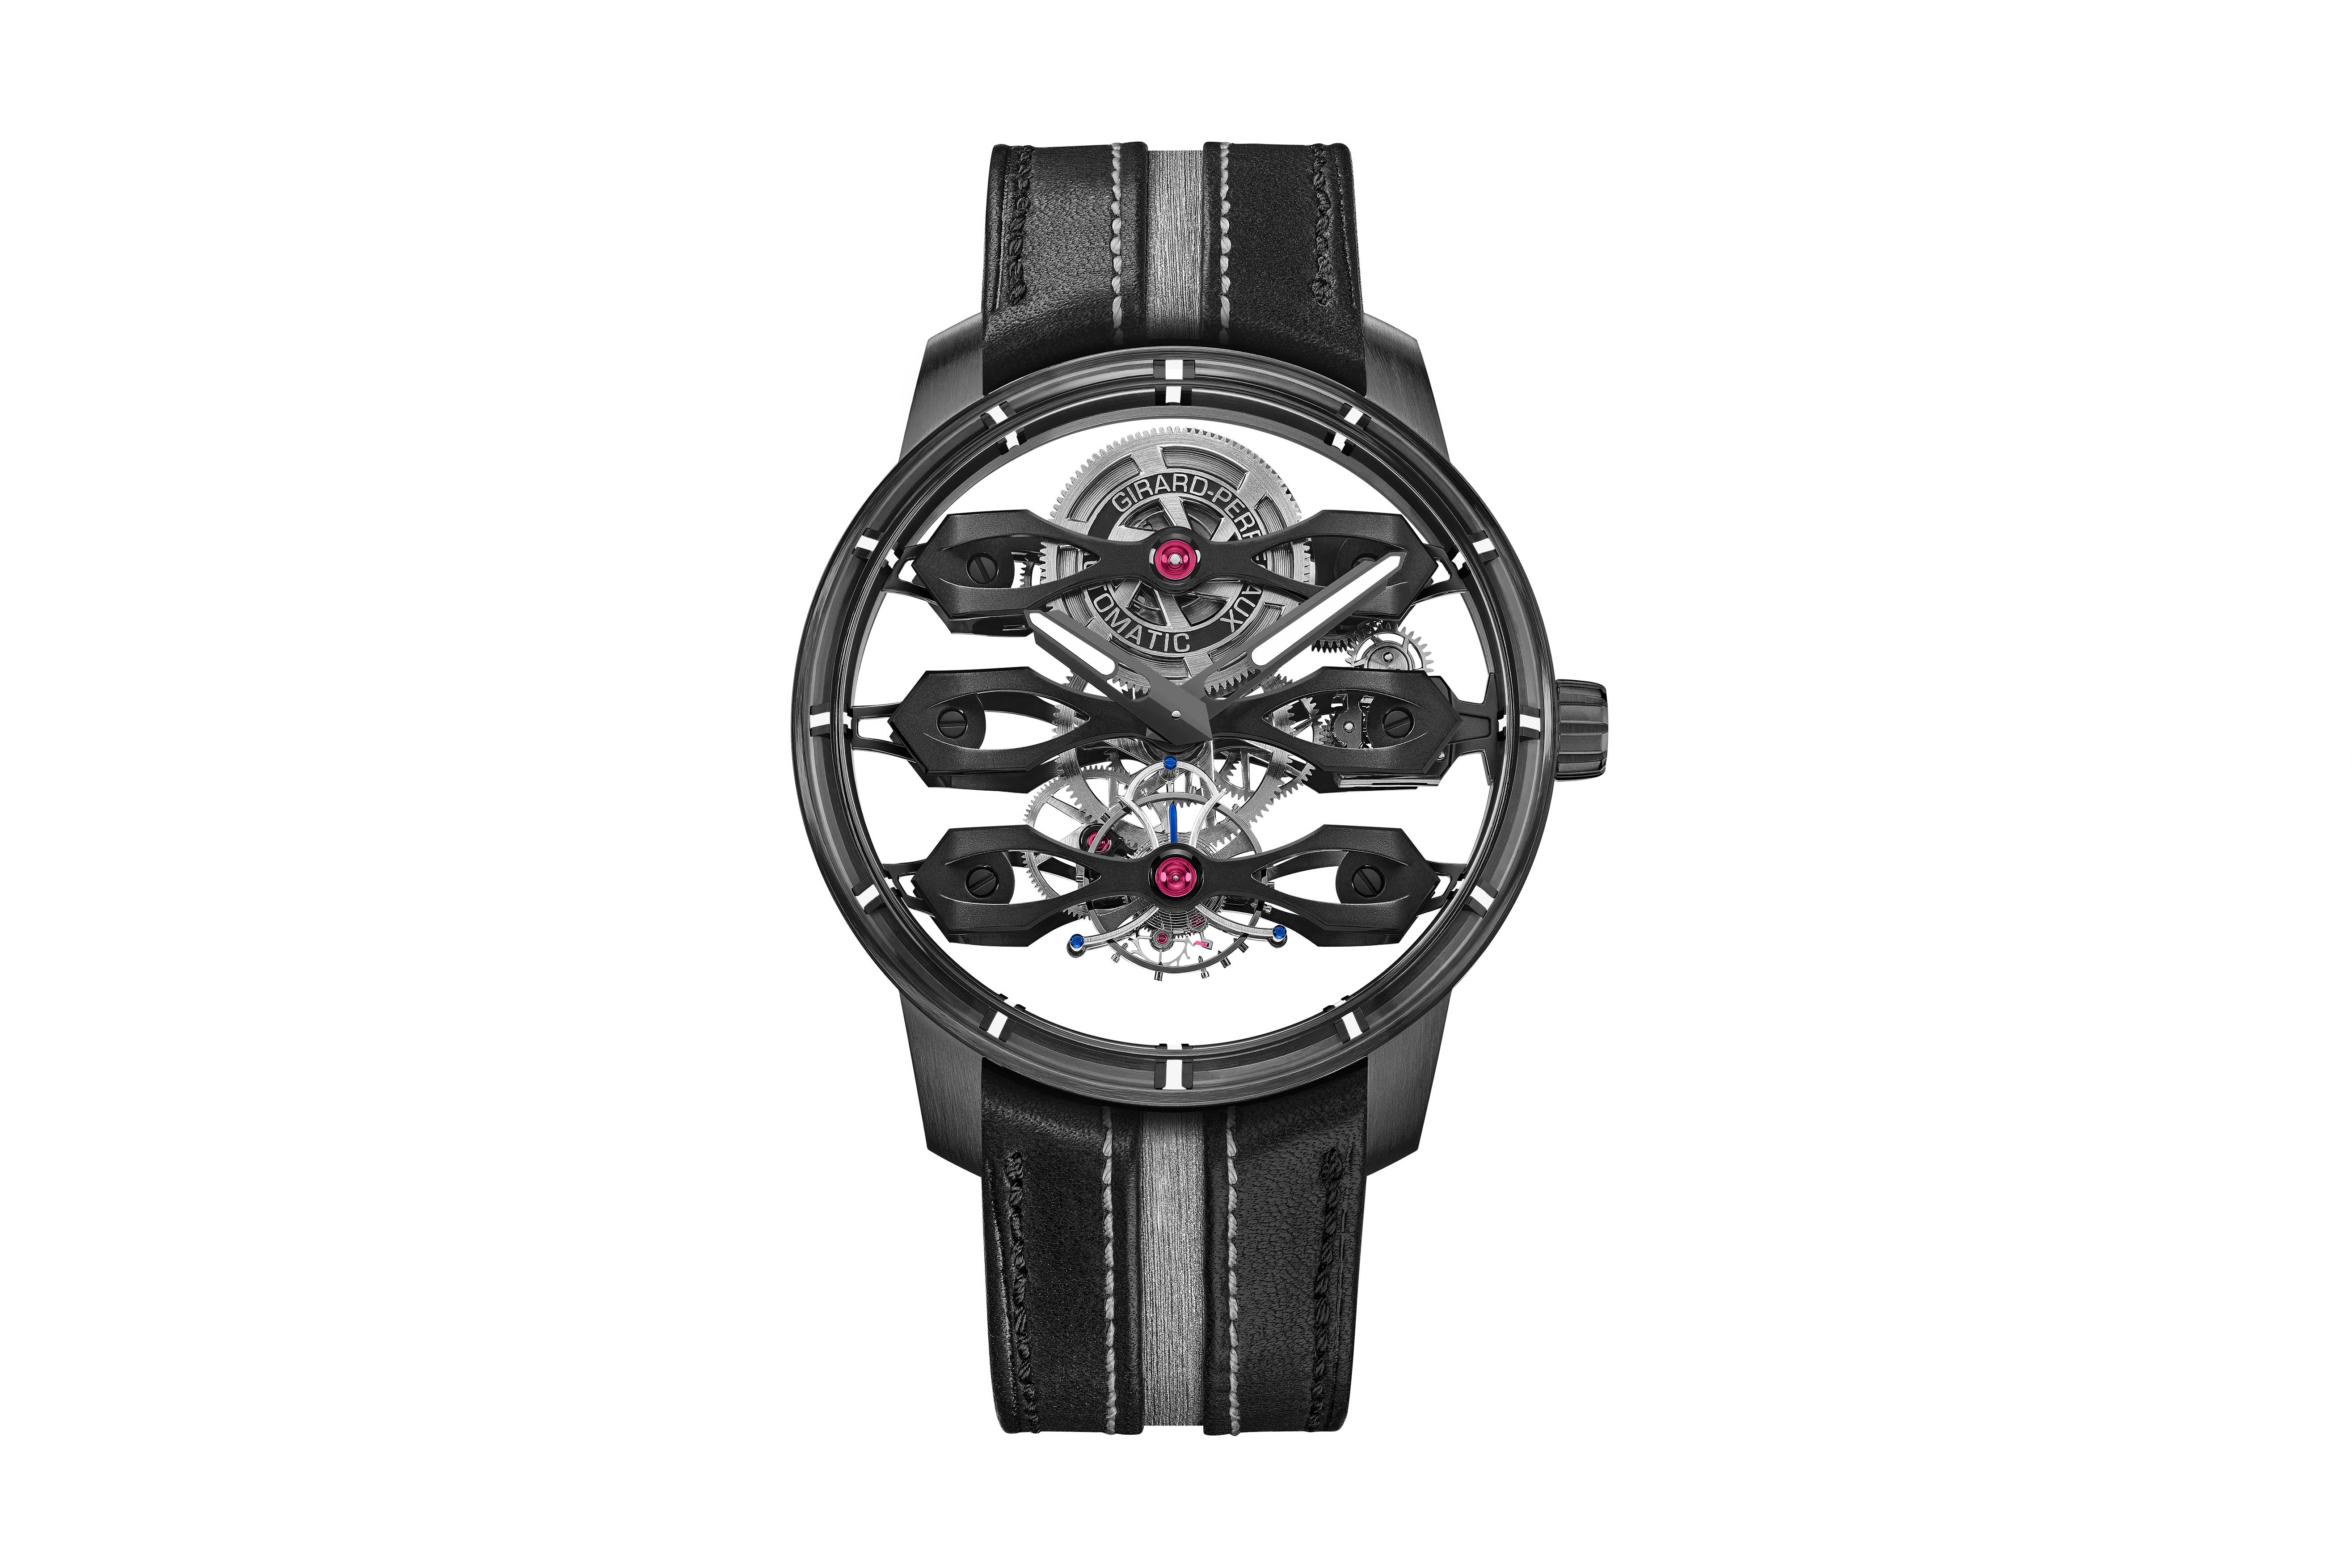 The Girard-Perregaux Tourbillon with Three Flying Bridges – Aston Martin Edition, seen here on the black calf leather strap with rubber alloy (injected white gold on rubber) insert